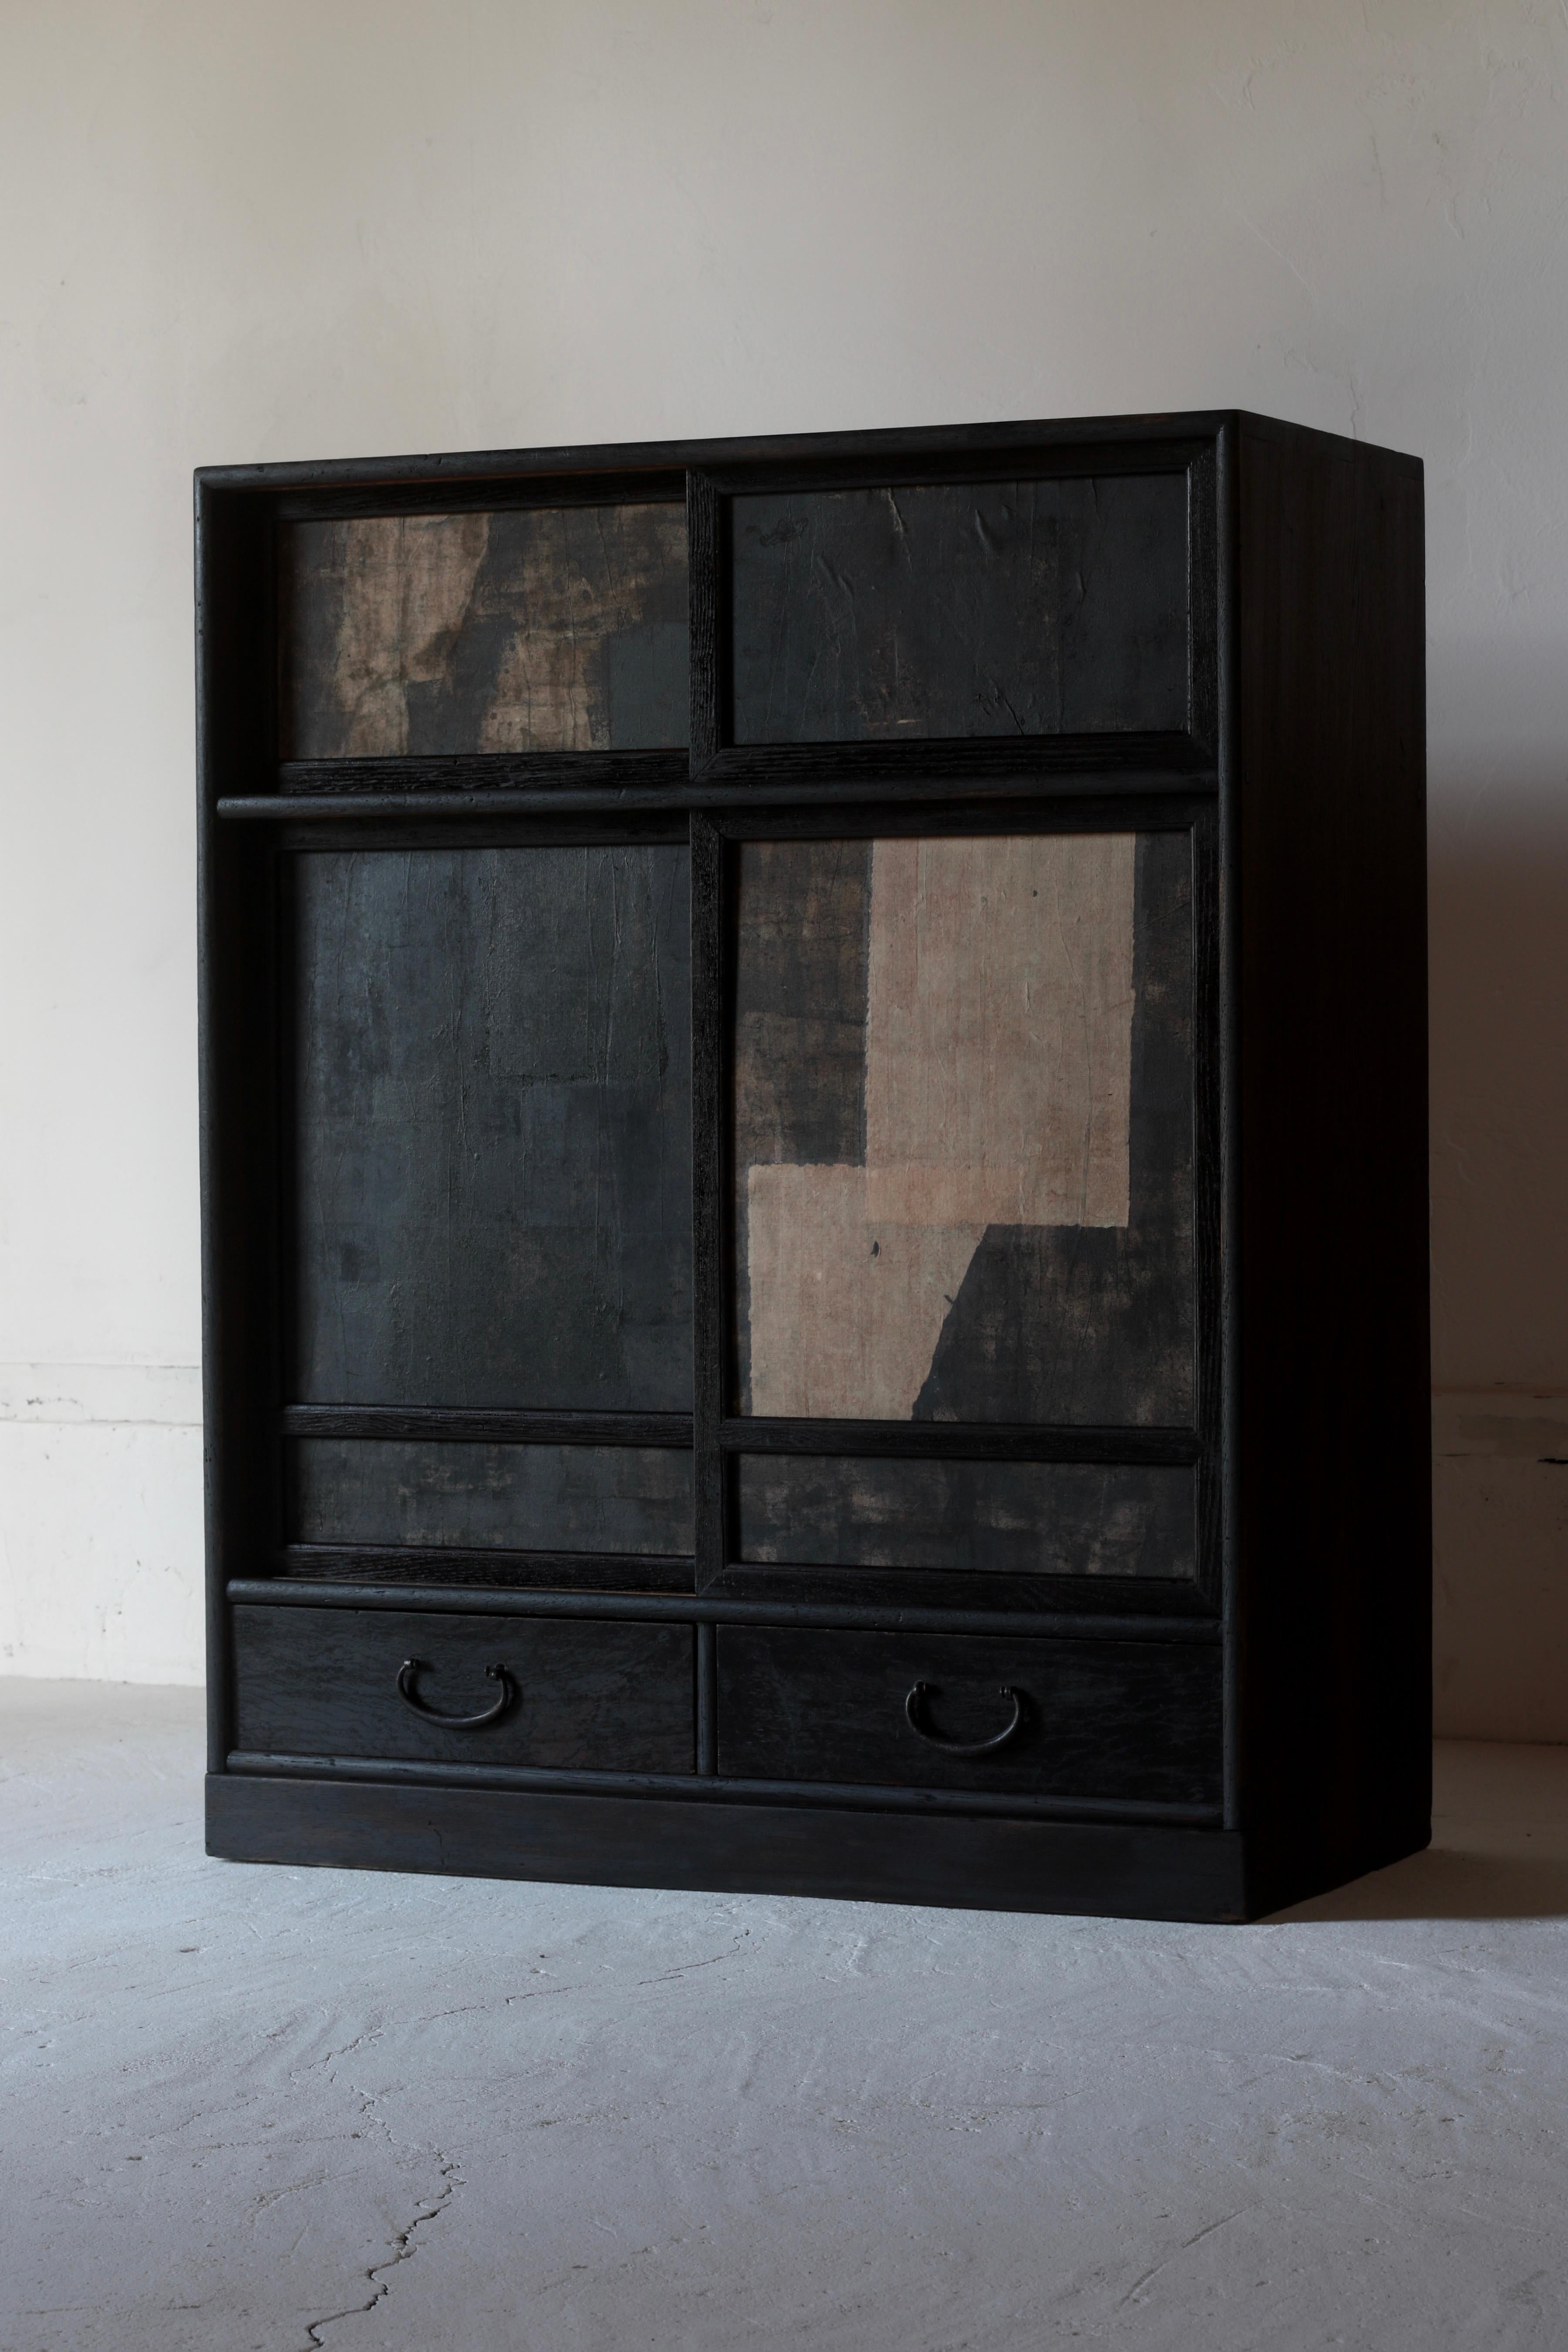 This is an old Japanese Cha-Tansu.

It is a Japanese-style furniture with shelves, different shelves and drawers for storing tea utensils, confectionery vessels, tableware, etc.

It is a furniture that is often placed and used in the tea room, and